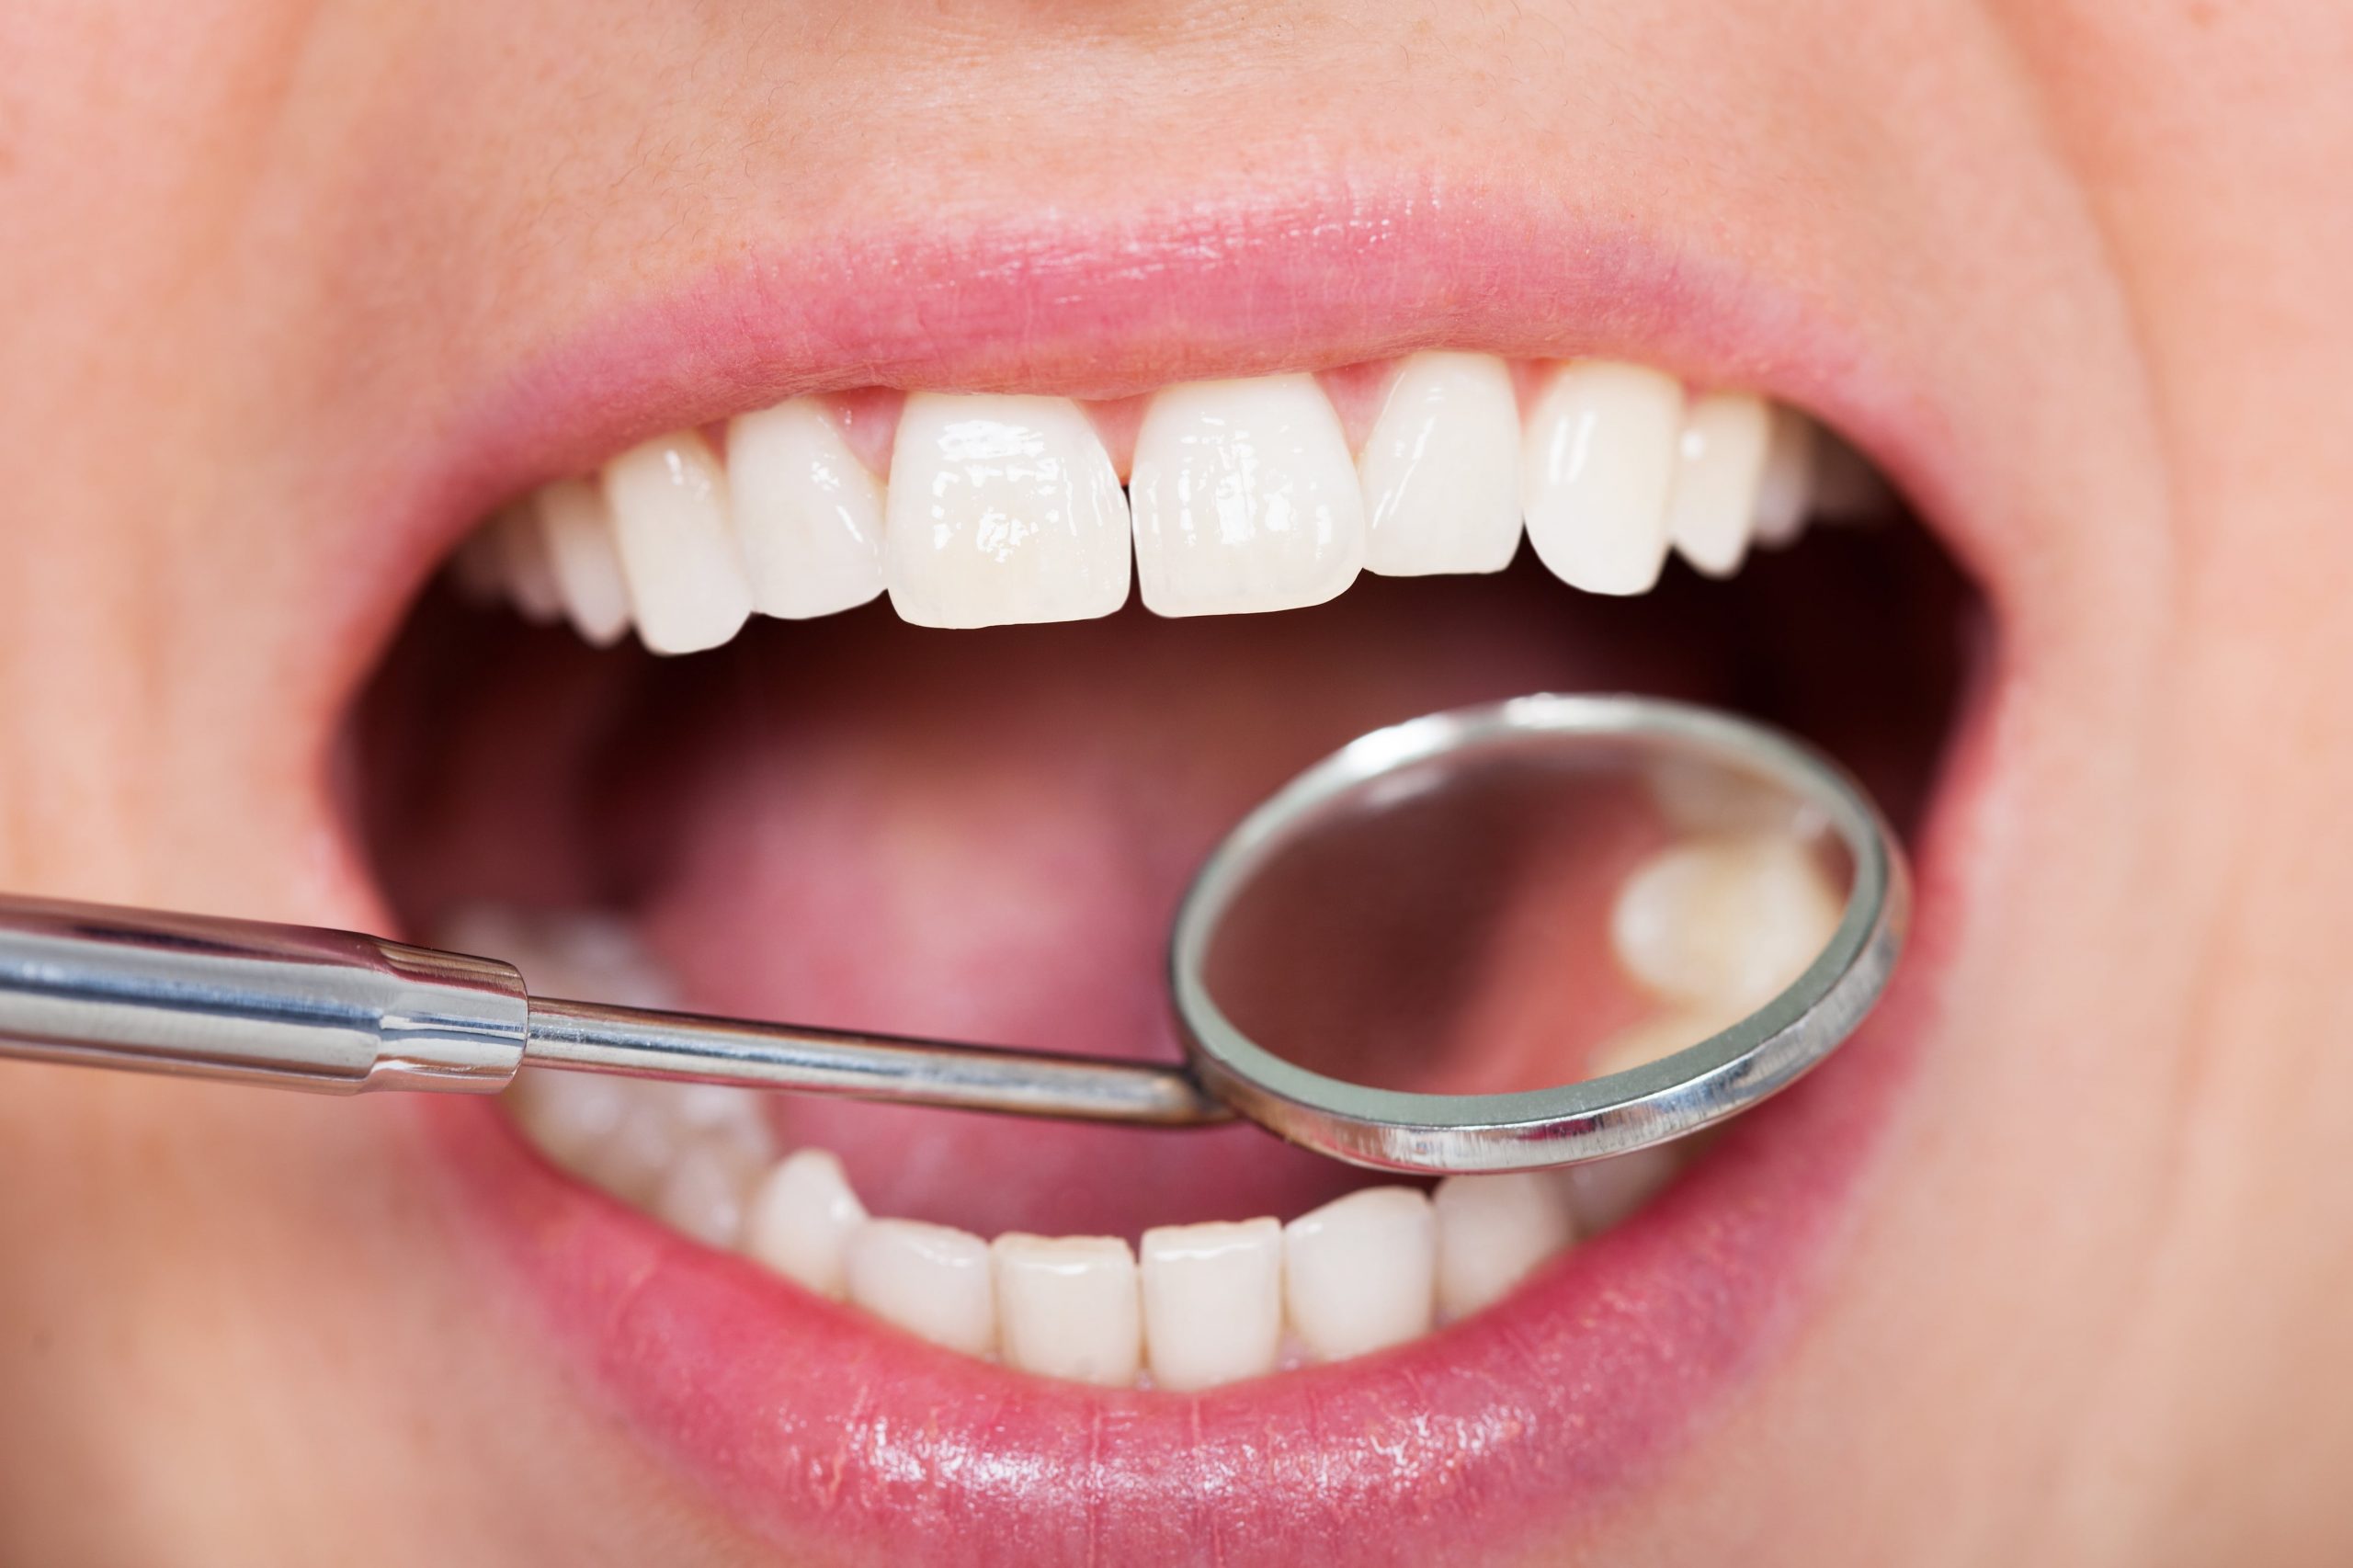 What are the perks of white fillings?